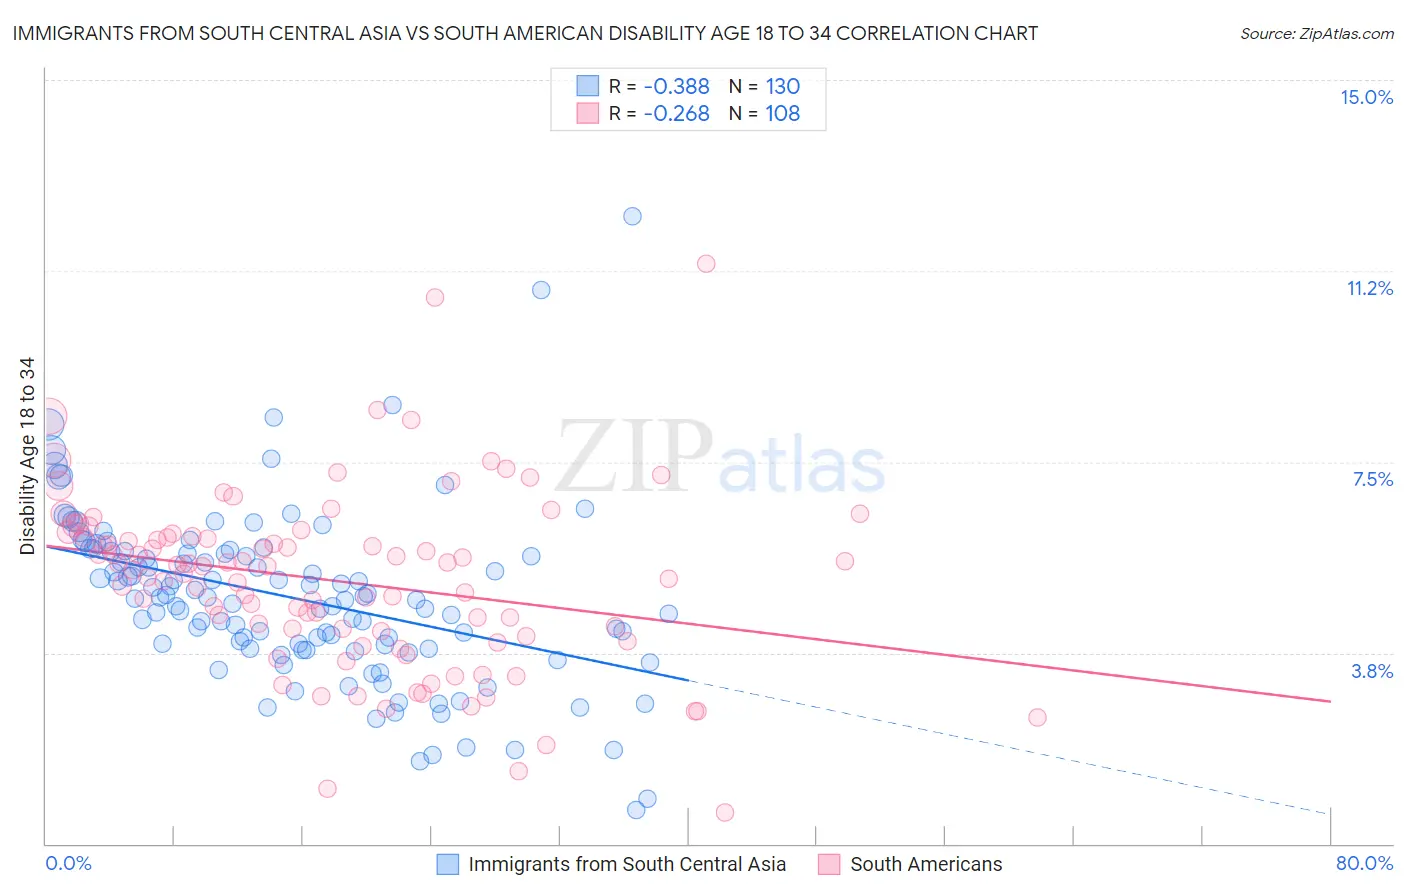 Immigrants from South Central Asia vs South American Disability Age 18 to 34